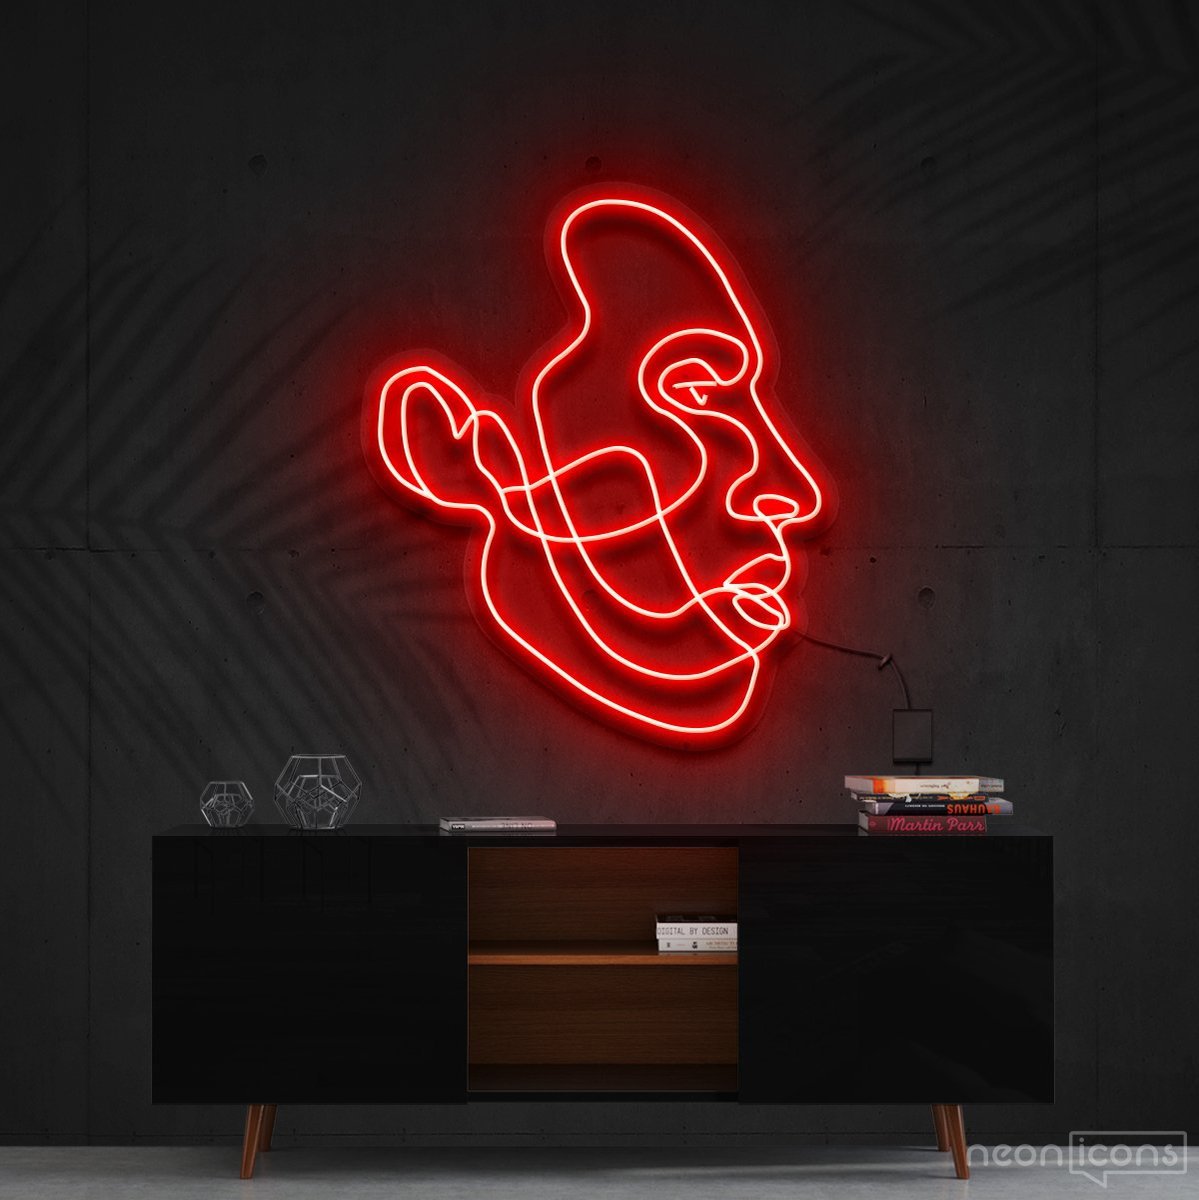 "Kobe Bryant" Neon Sign 60cm (2ft) / Red / Cut to Shape by Neon Icons